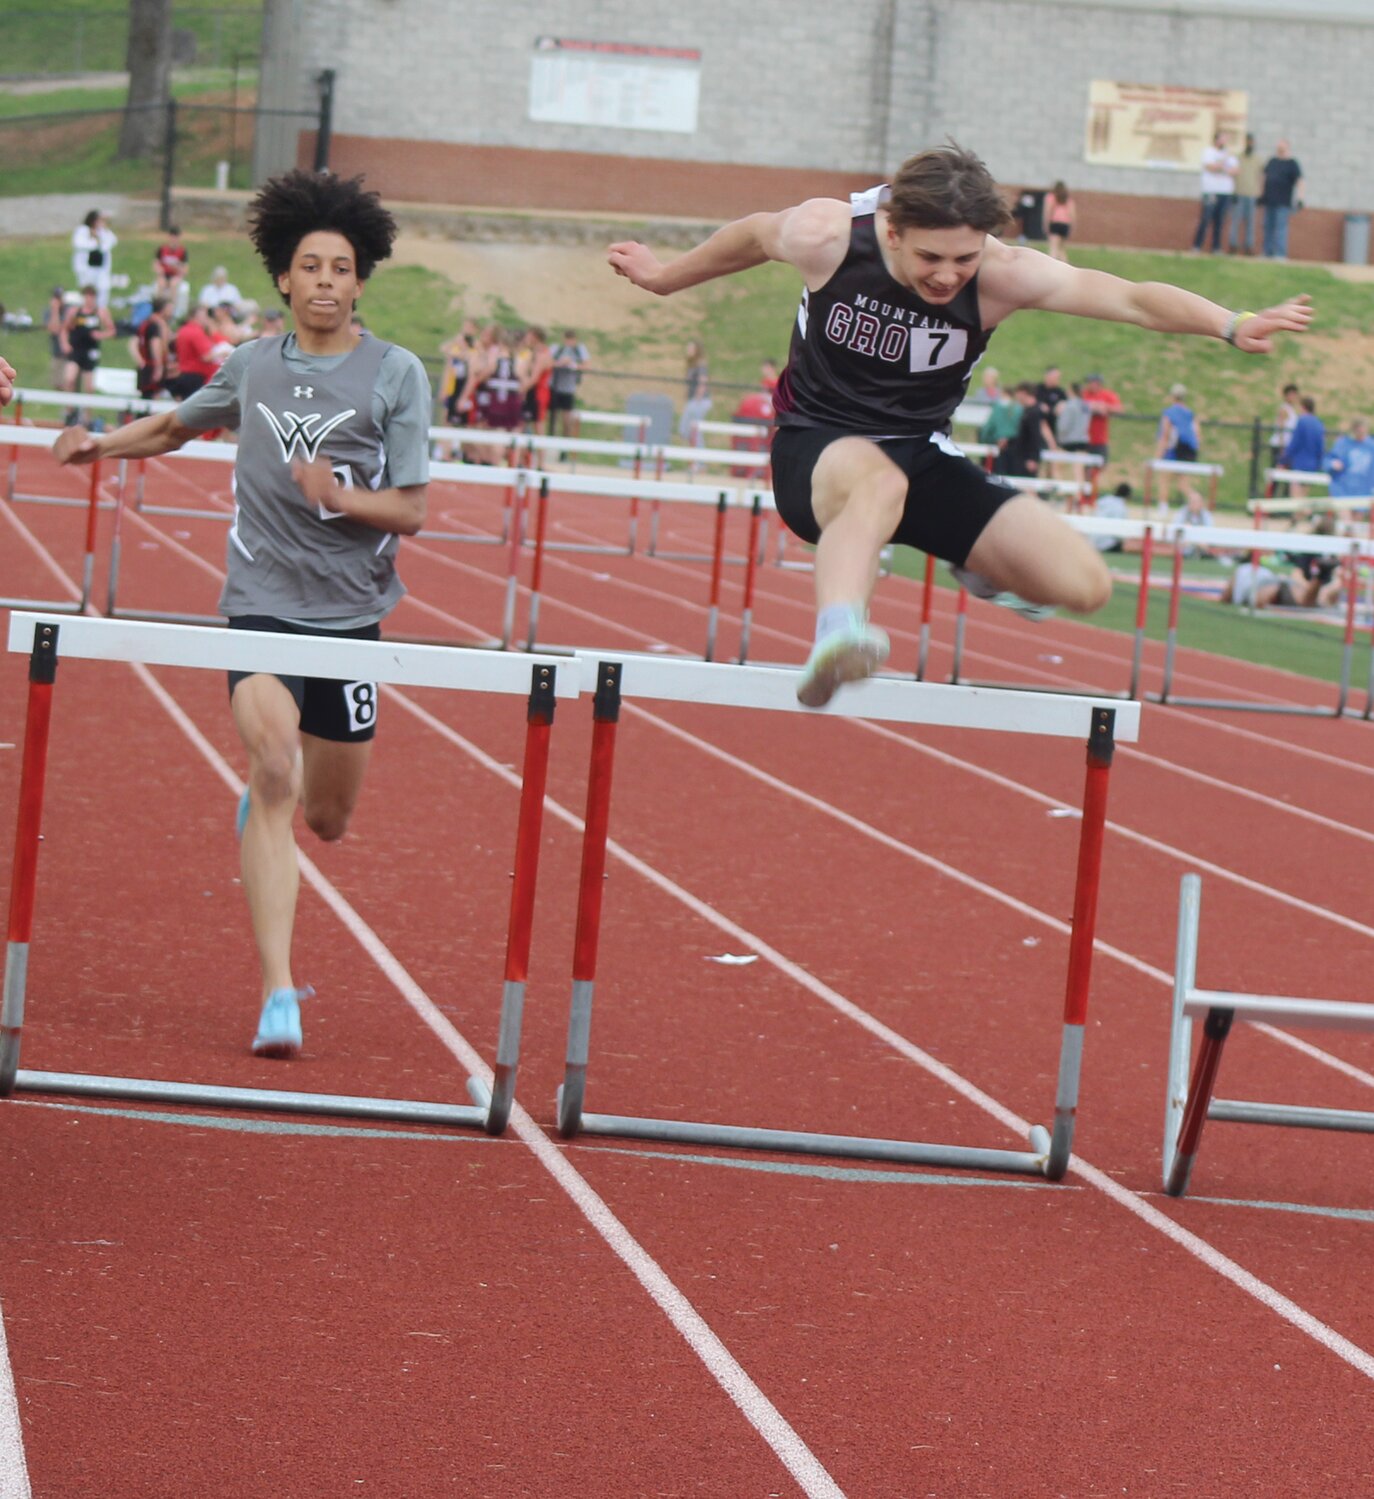 Mountain Grove’s Alexander Prestage clears the final hurdle in the 300-meter hurdles race.